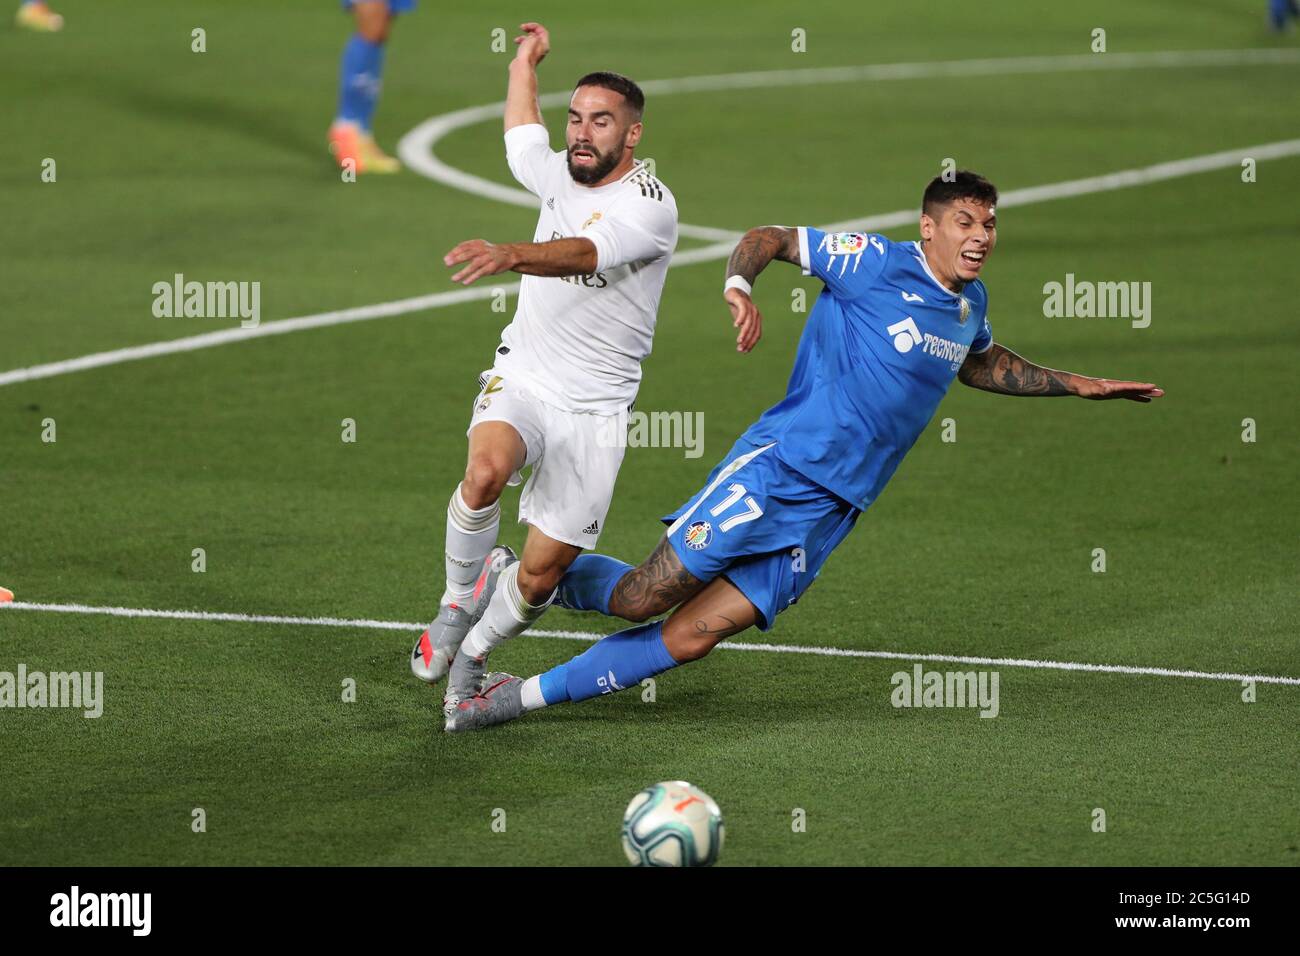 Madrid, Spain. 2nd July, 2020. Real Madrid's Dani Carvajal (L) vies with Getafe's Mathias Olivera during a Spanish league football match between Real Madrid and Getafe in Madrid, Spain, July 2, 2020. Credit: Edward F. Peters/Xinhua/Alamy Live News Stock Photo